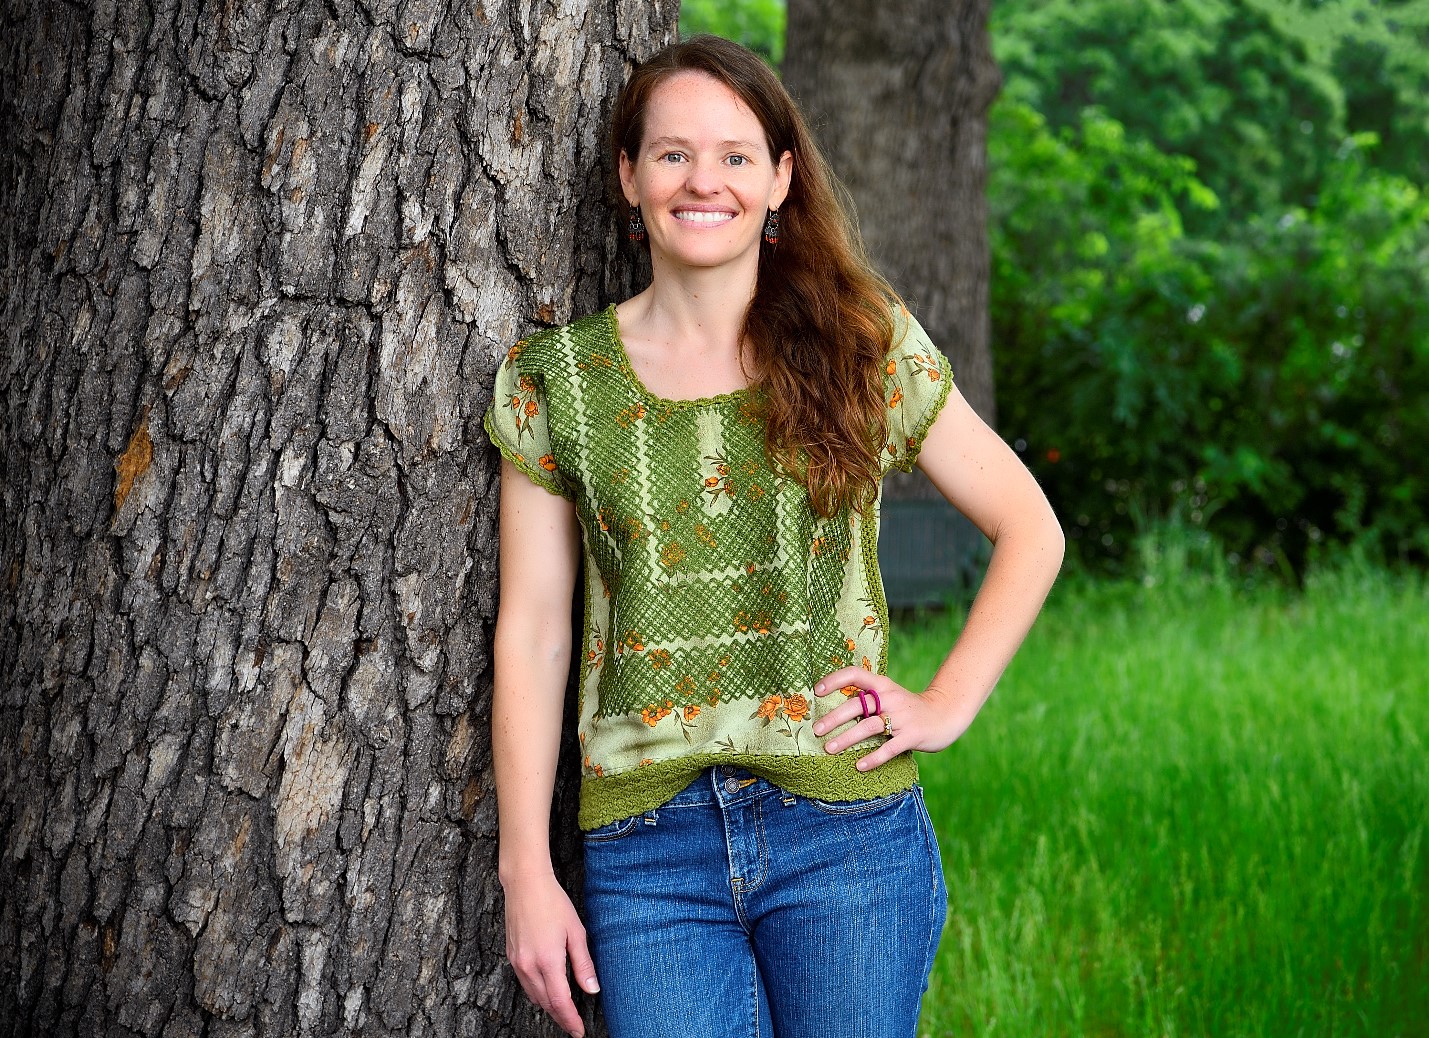 Alexandra Ponette-González, University of North Texas assistant professor of geography, will study post oak and blackjack oak trees as urban air filters for the environment after receiving a National Science Foundation CAREER Award